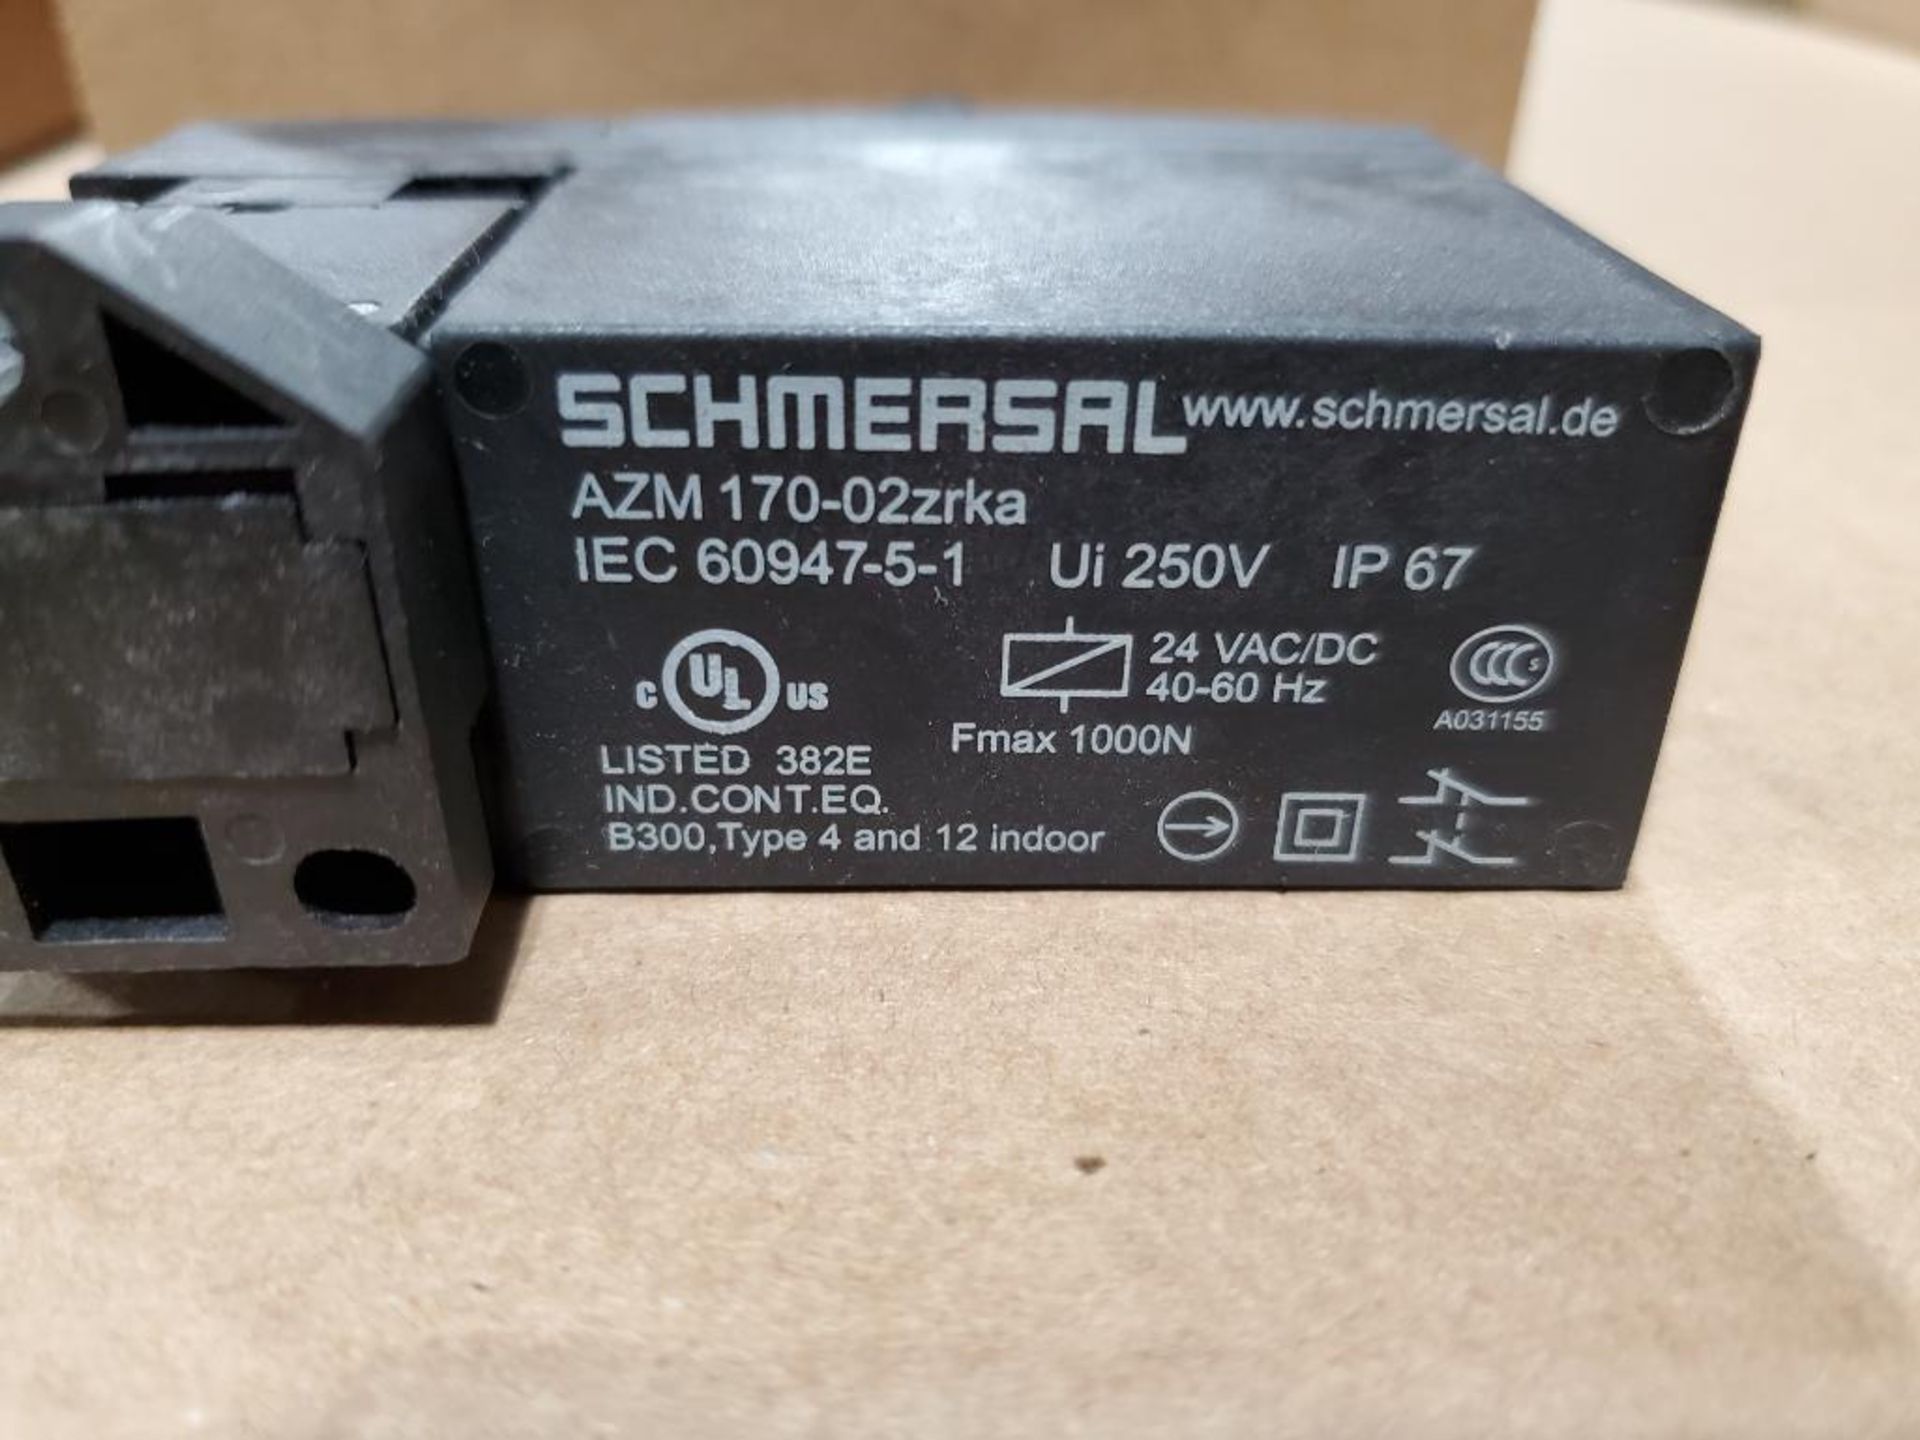 Qty 4 - Schmersal safety switch. Part number AZM-170-02zrka. - Image 4 of 5